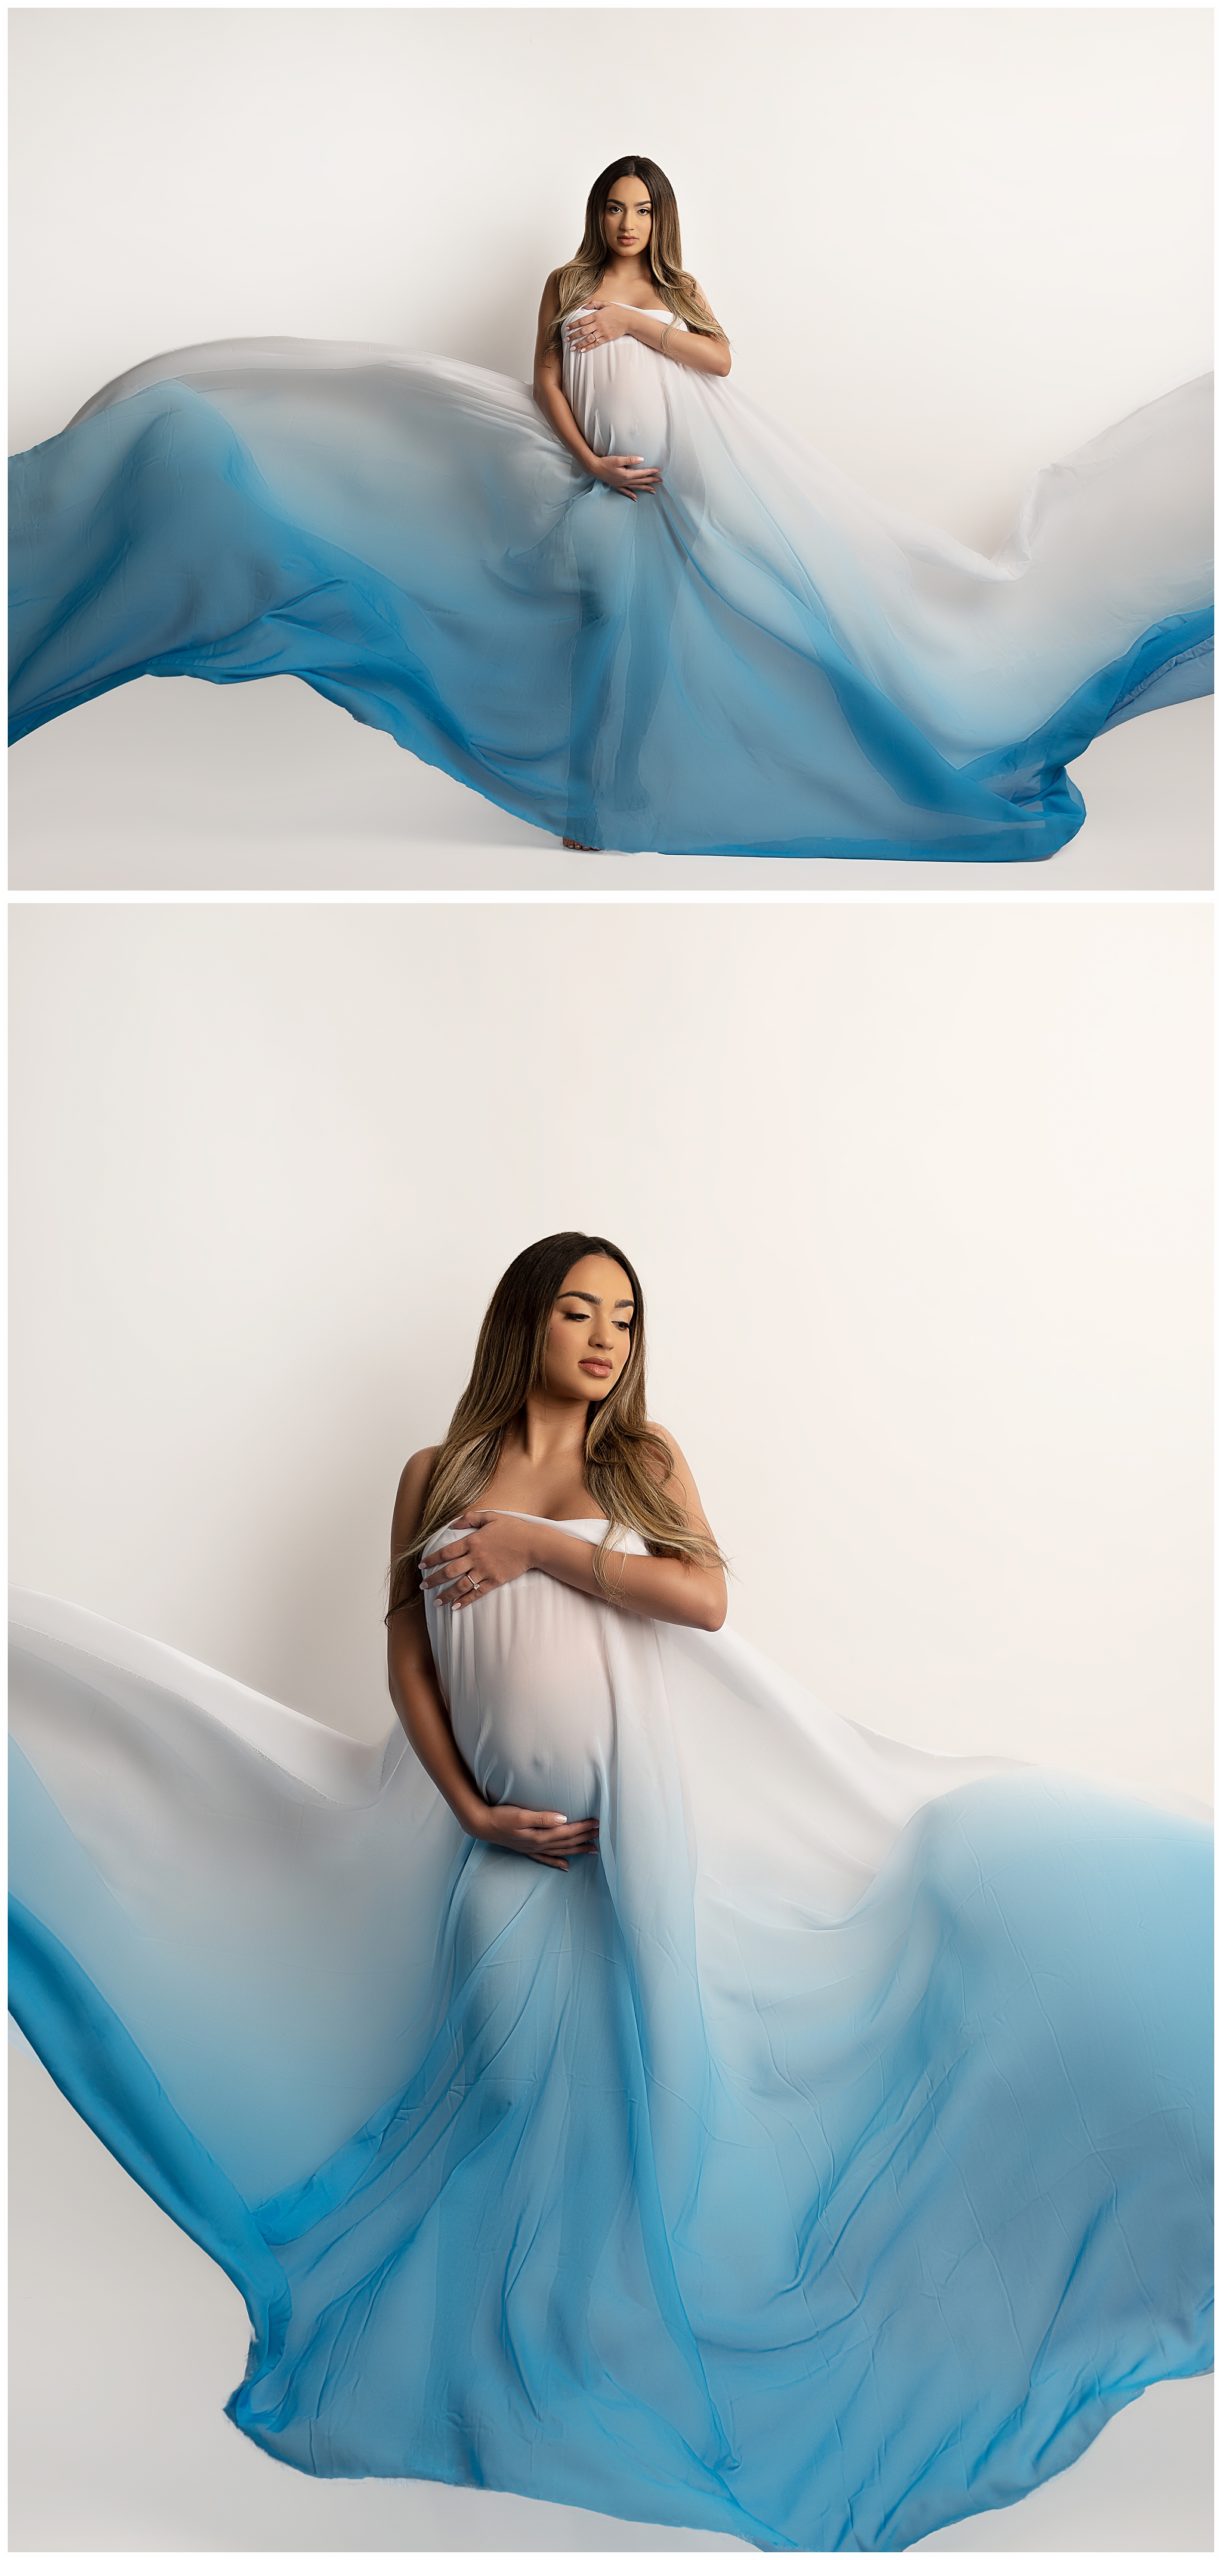 pregnant woman blue ombre fabric white background